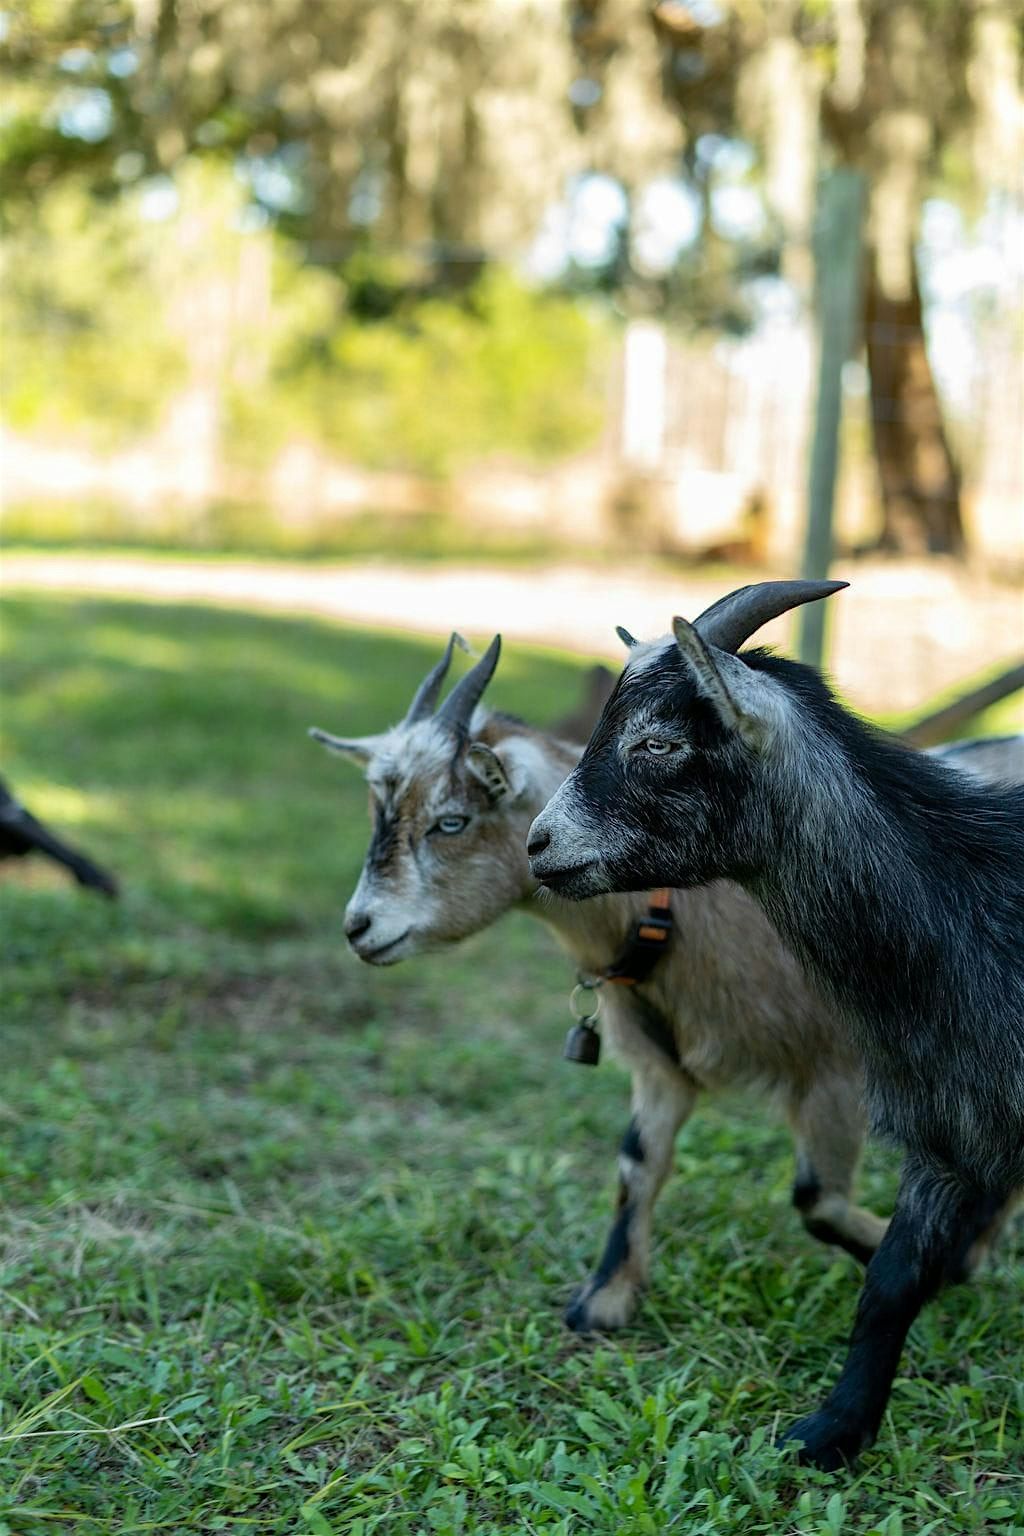 Guided Nature Trail Walk with The Goat Herd at Jaybird Hammock Farm